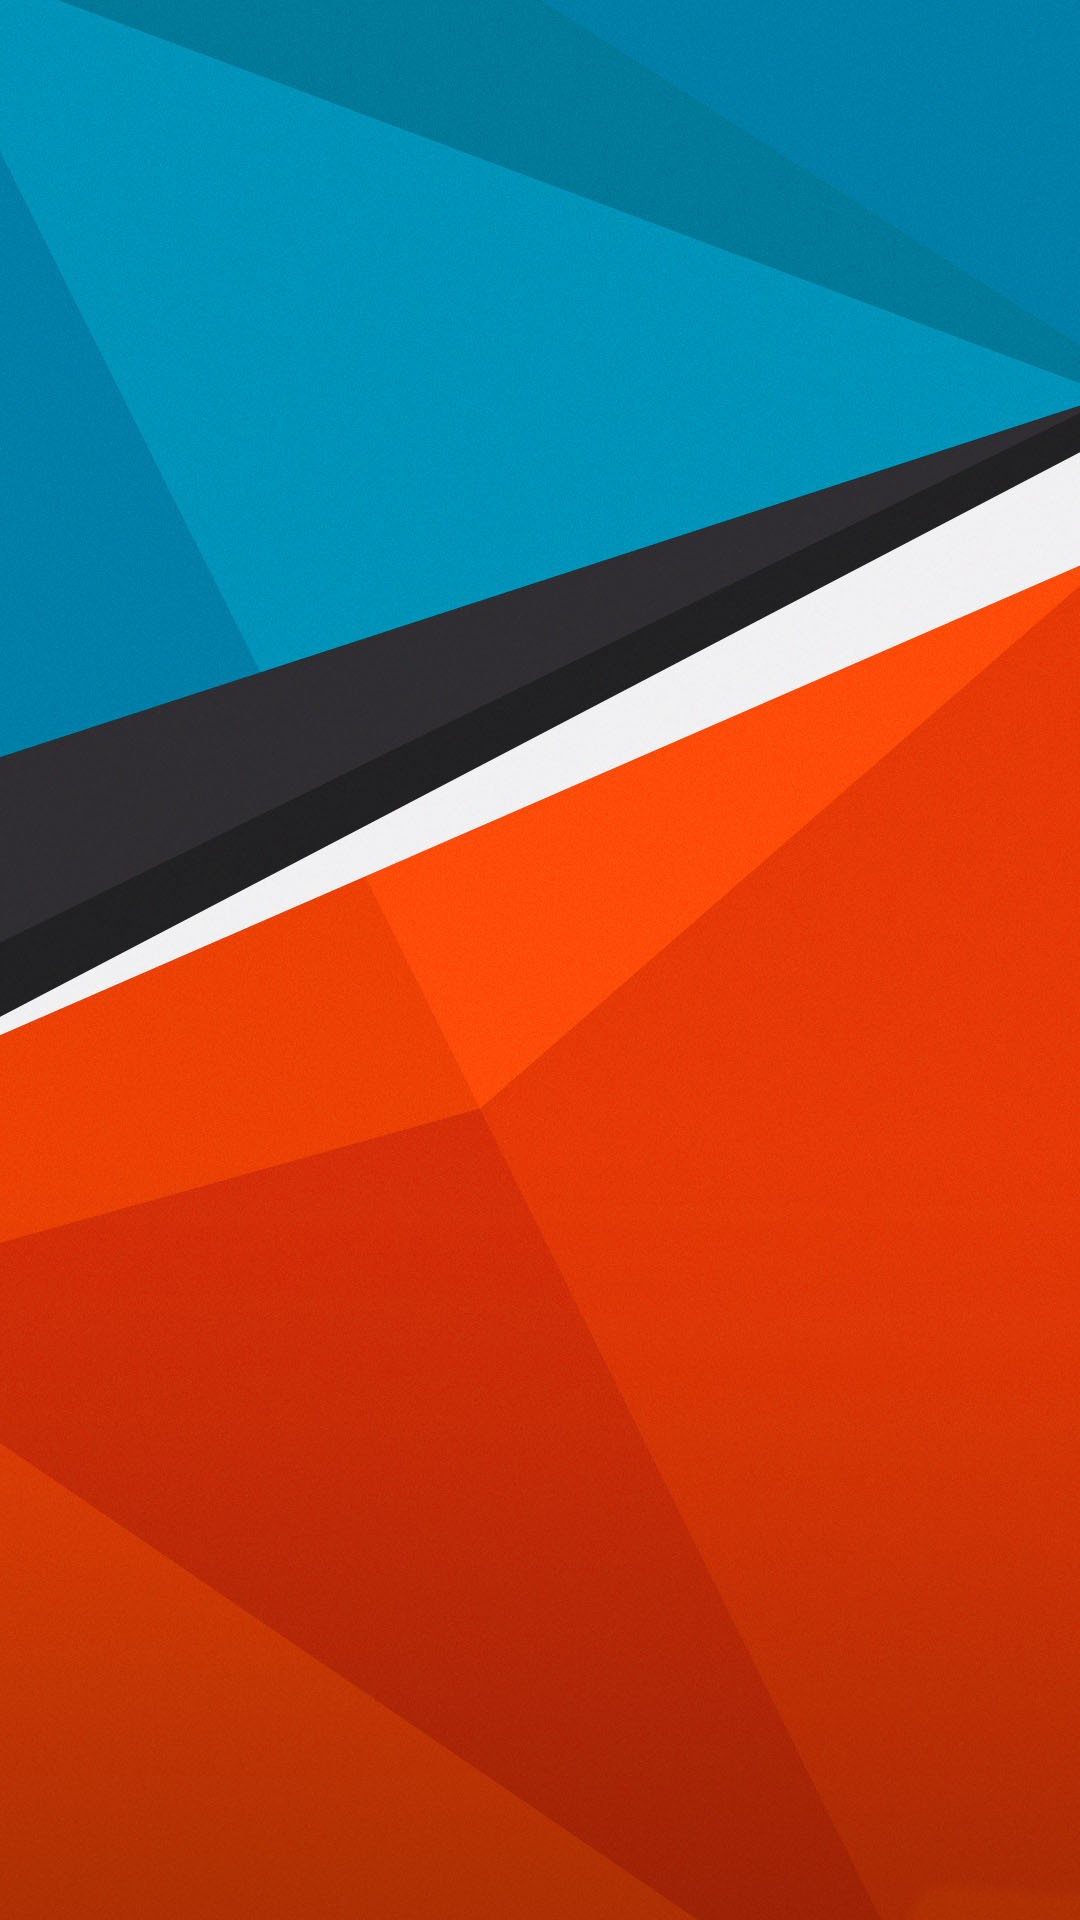 Htc One Wallpaper Blue Orange Android